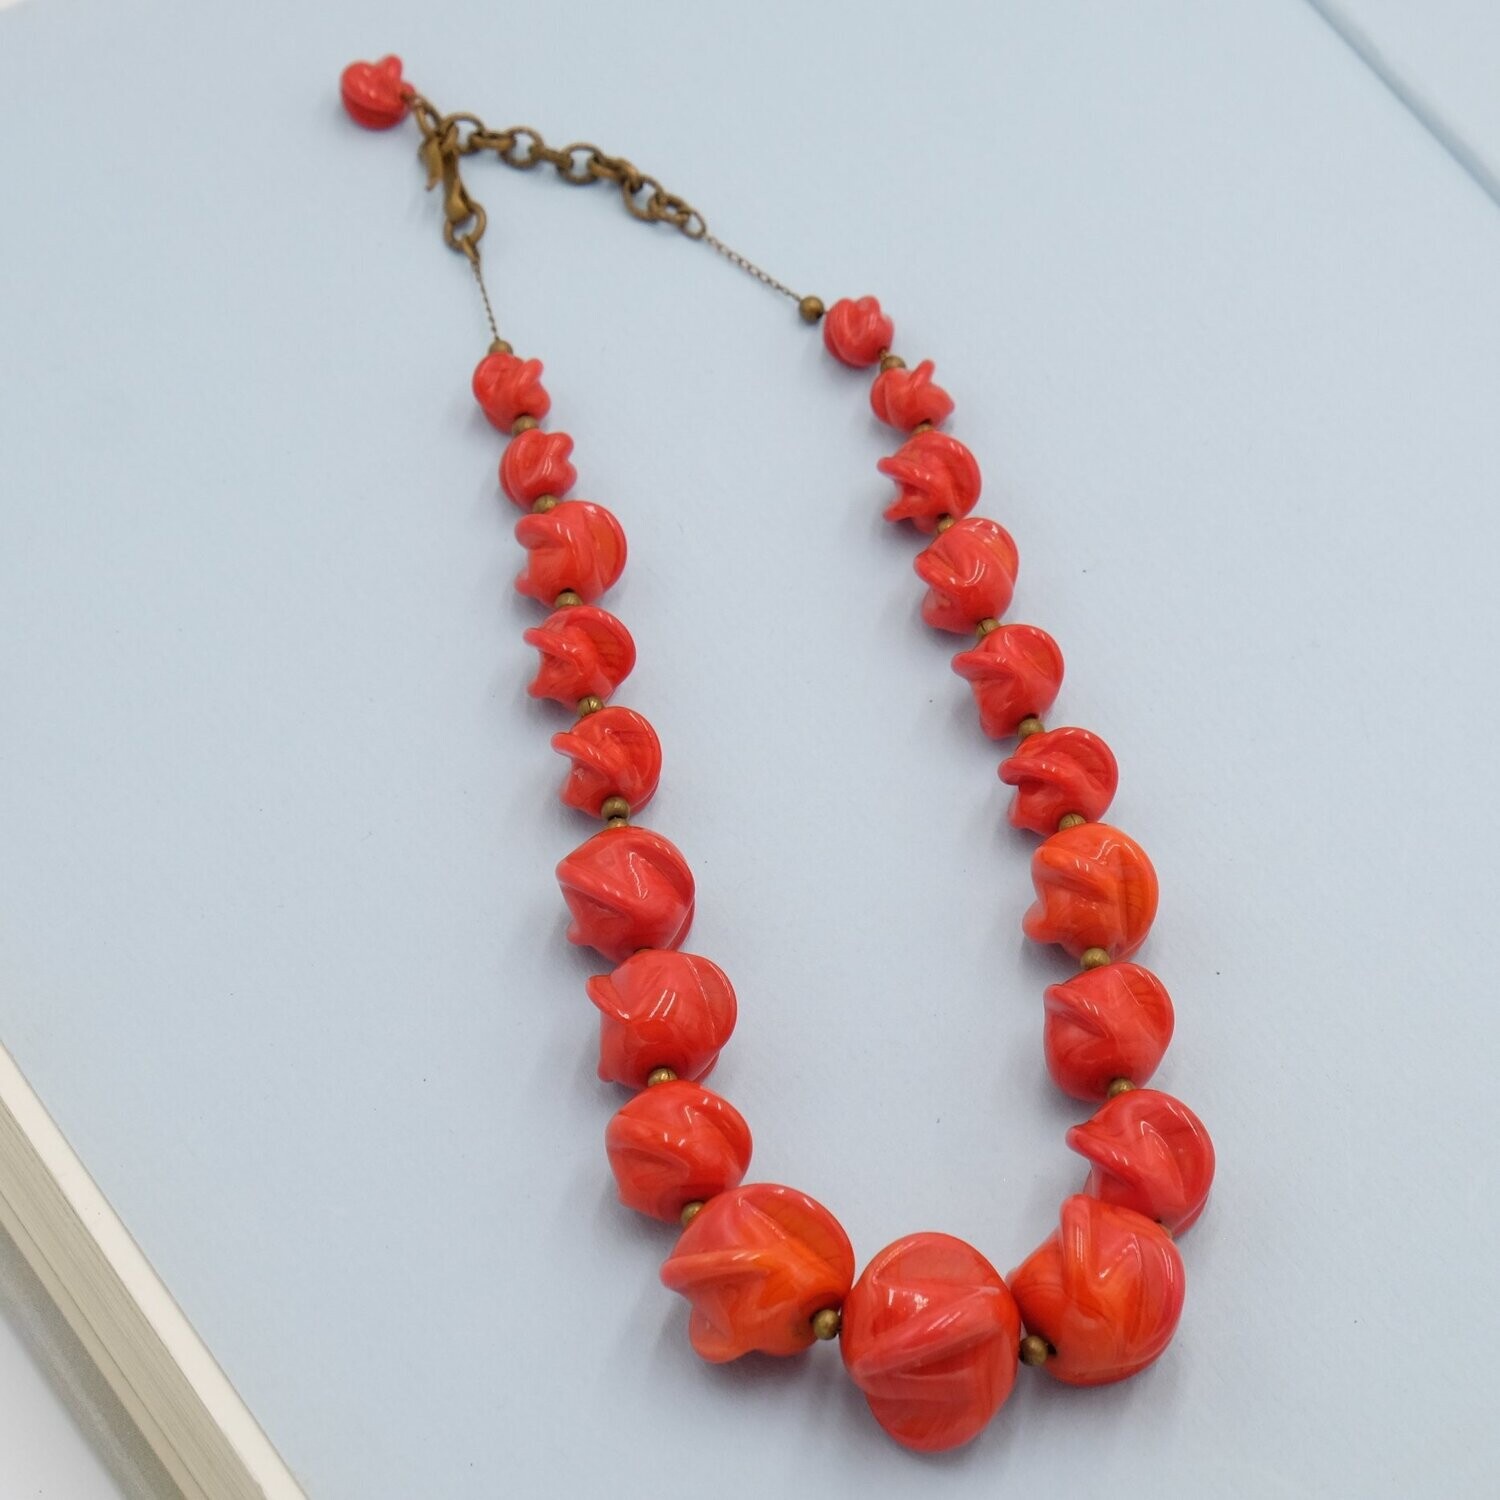 Antique Poured Red Glass Necklace 1920's